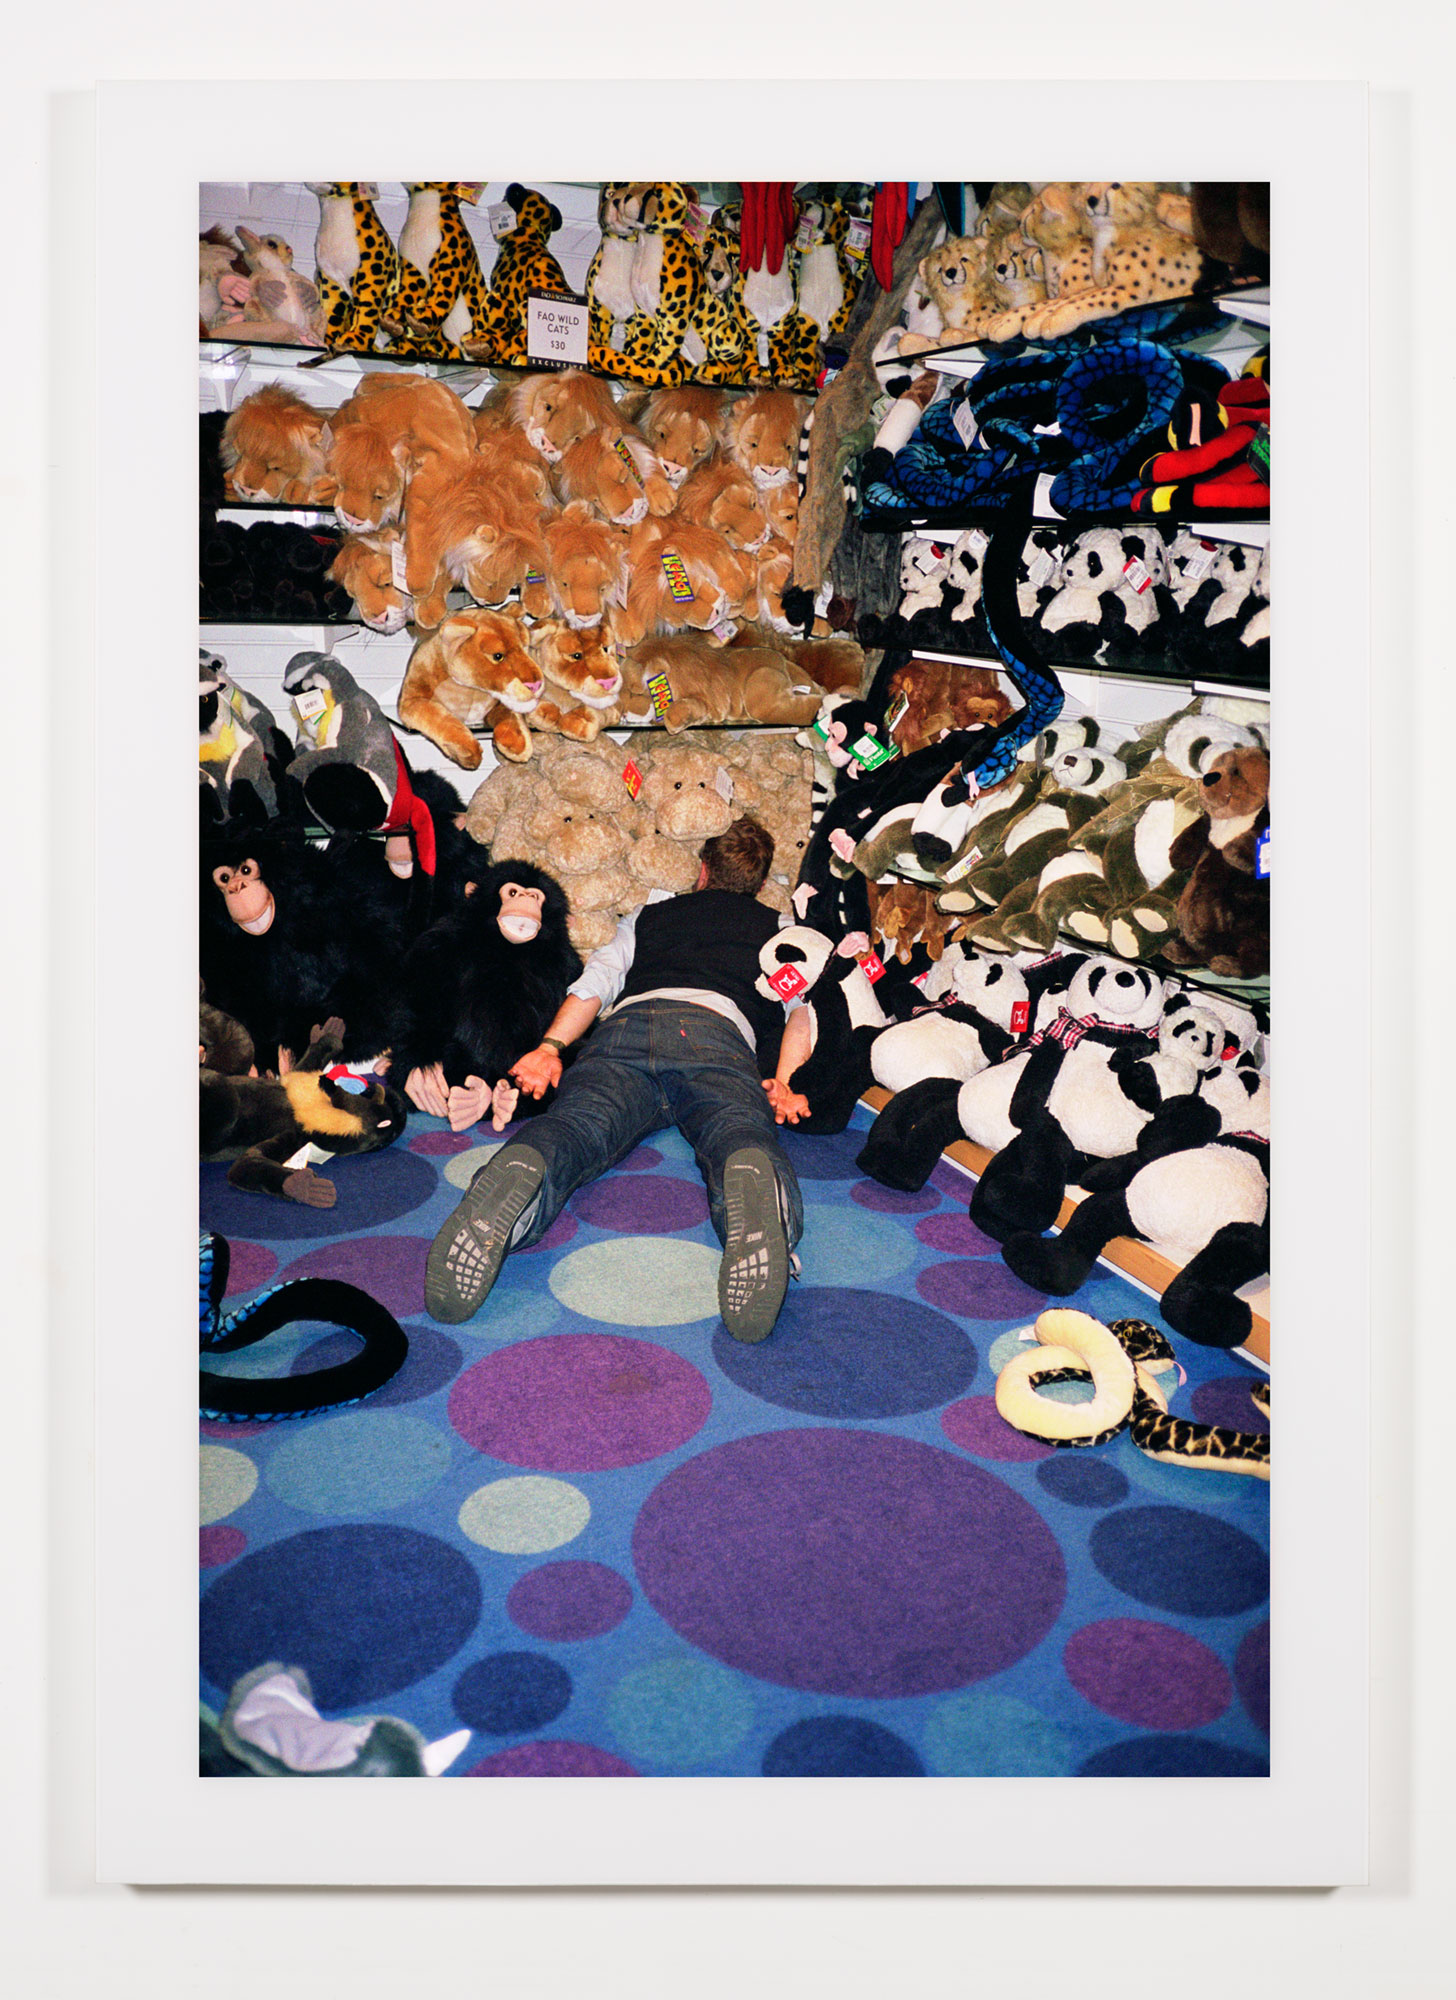   The Phenomenology of Shopping (FAO Schwartz, The Grove, Los Angeles, CA)    2002   Chromogenic print  68 x 47 3/4 inches    